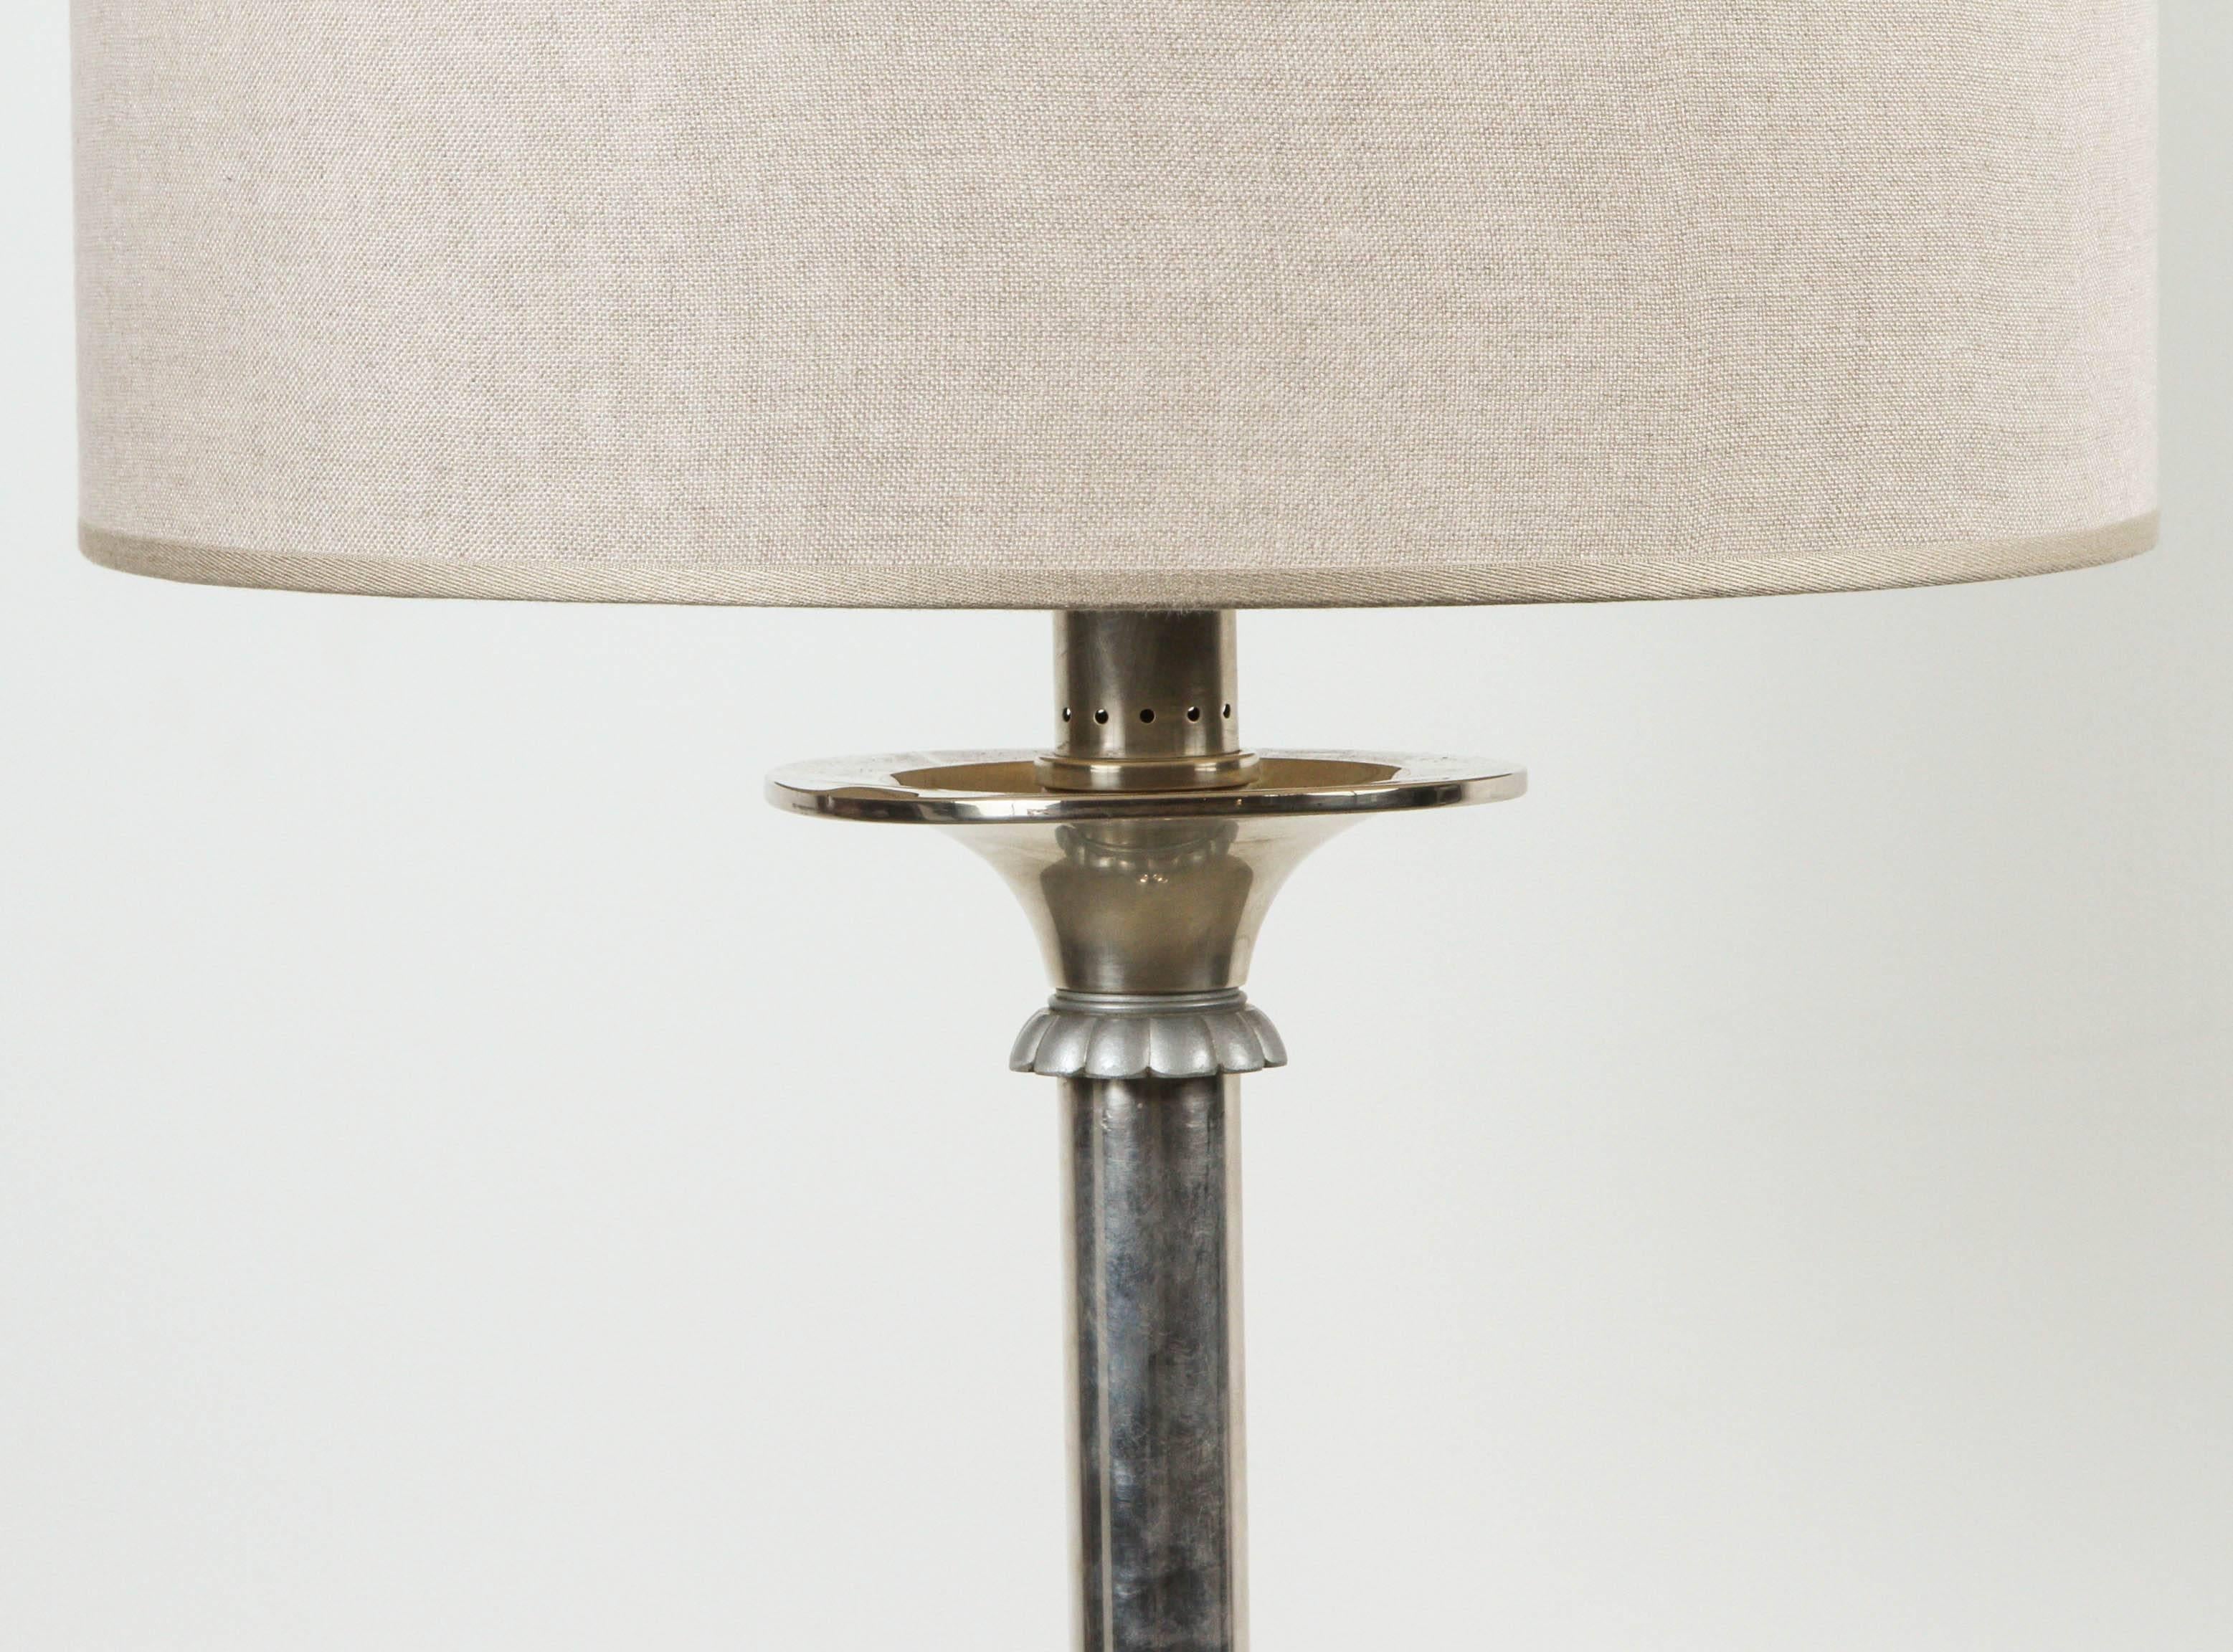 20th Century Italian Silver Floor Lamp with Flower Detail and an Oversized Lamp Shade